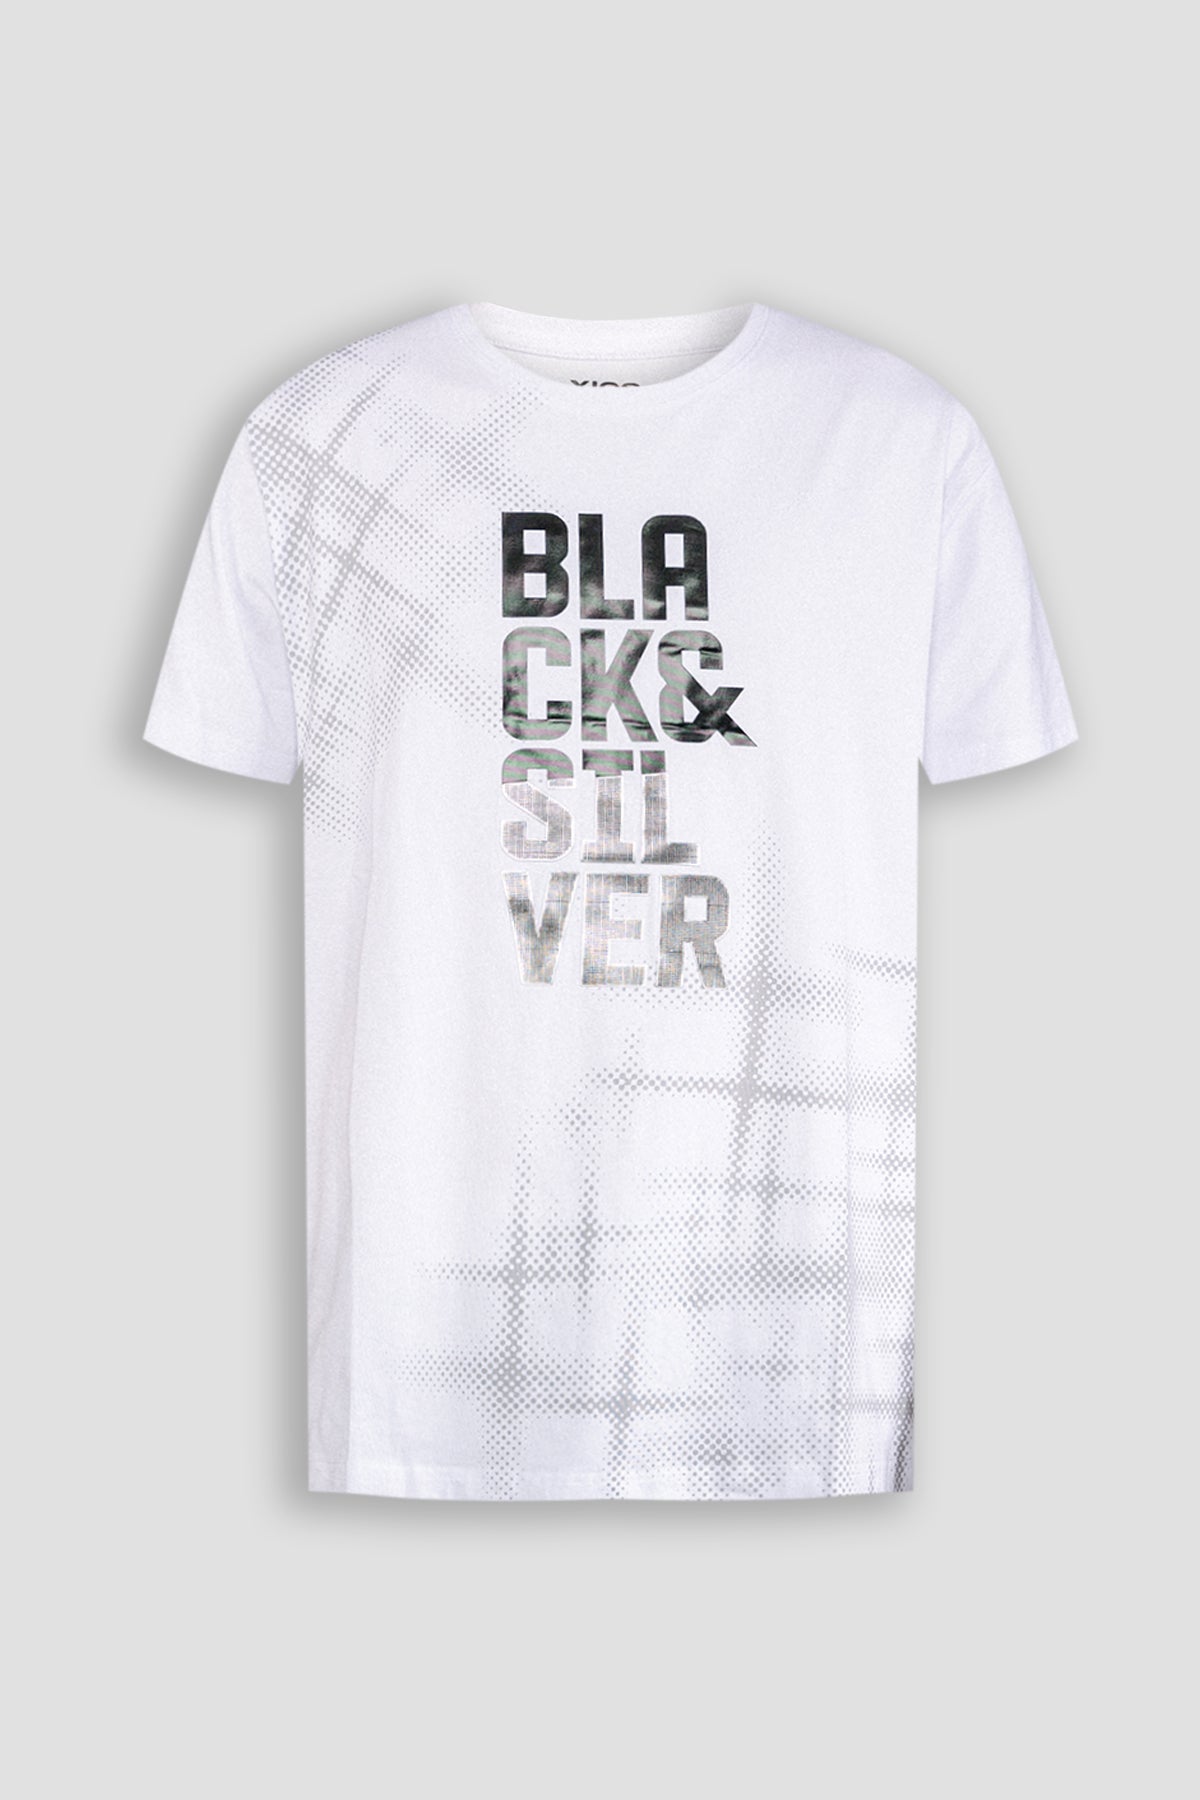 "Black & Silver" Graphic Tee